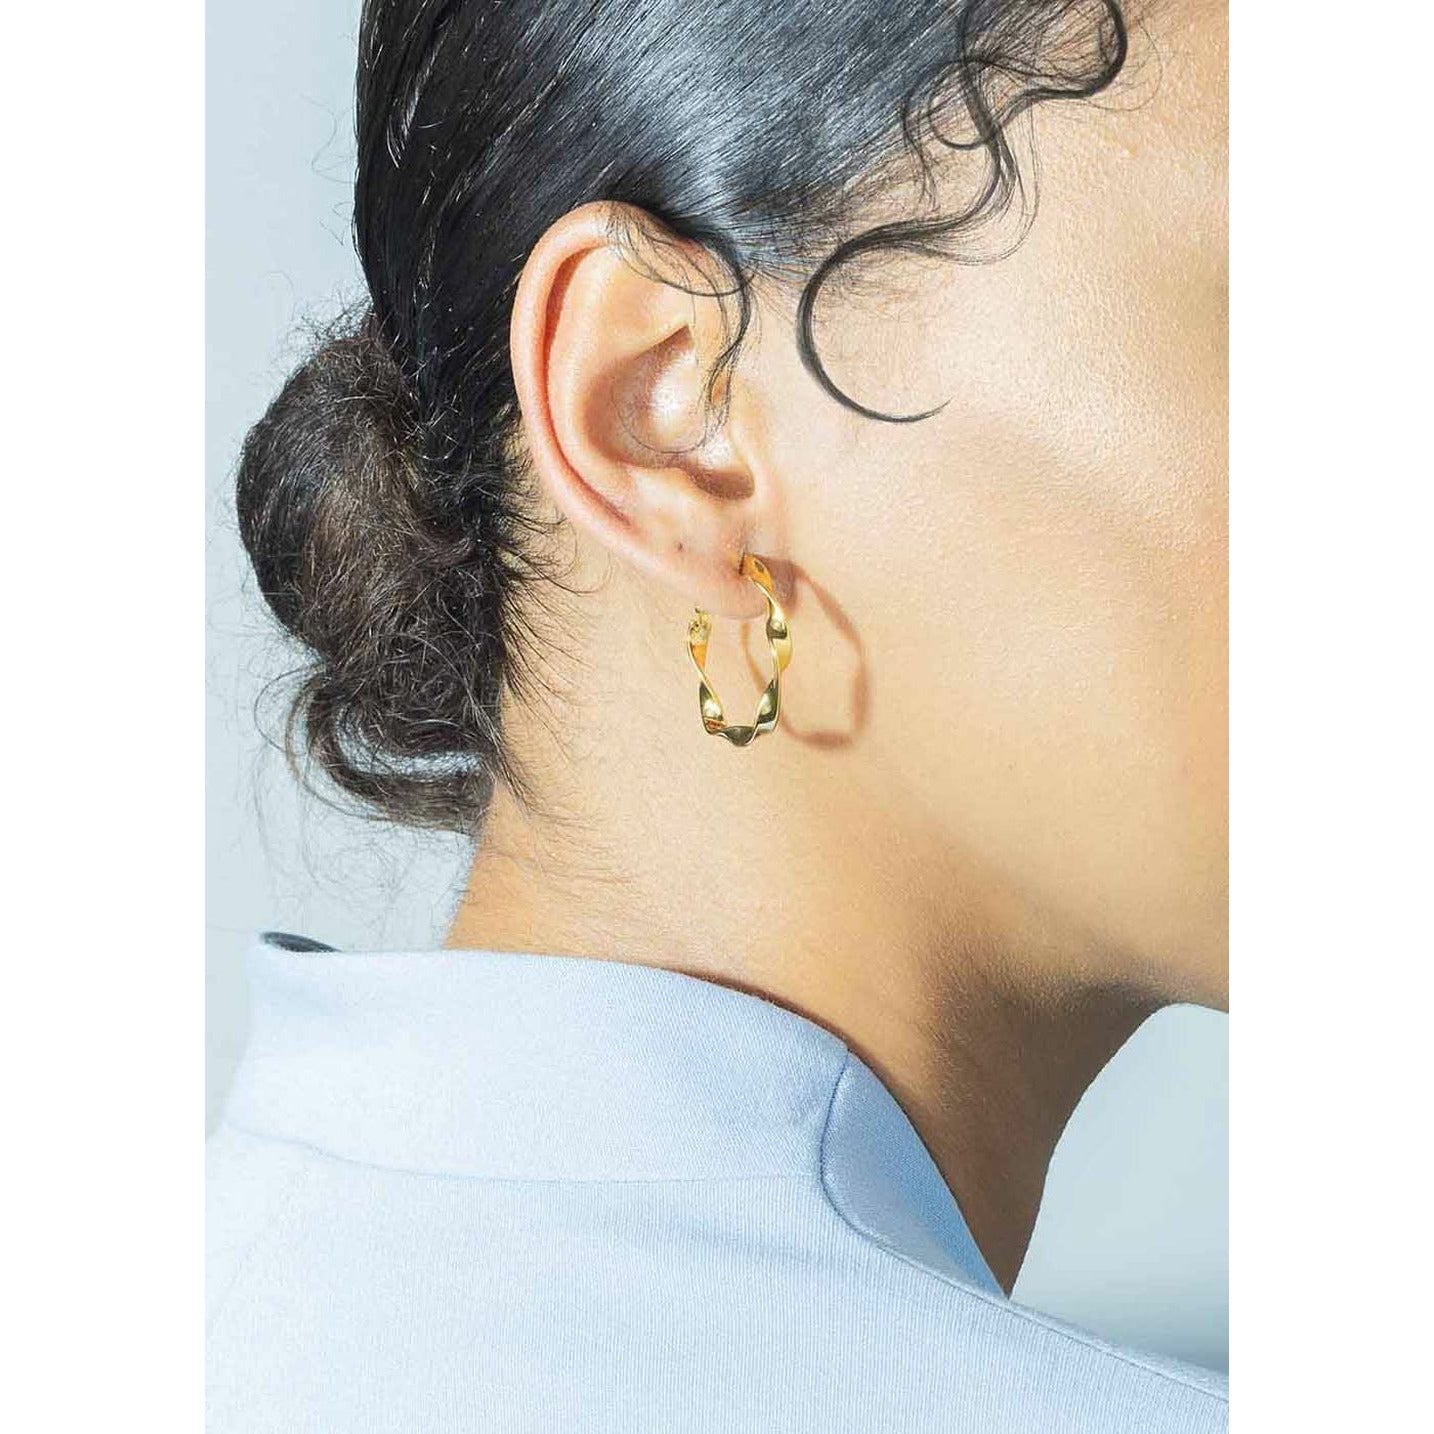 Vincent Olga Creol Earrings Gold Plated